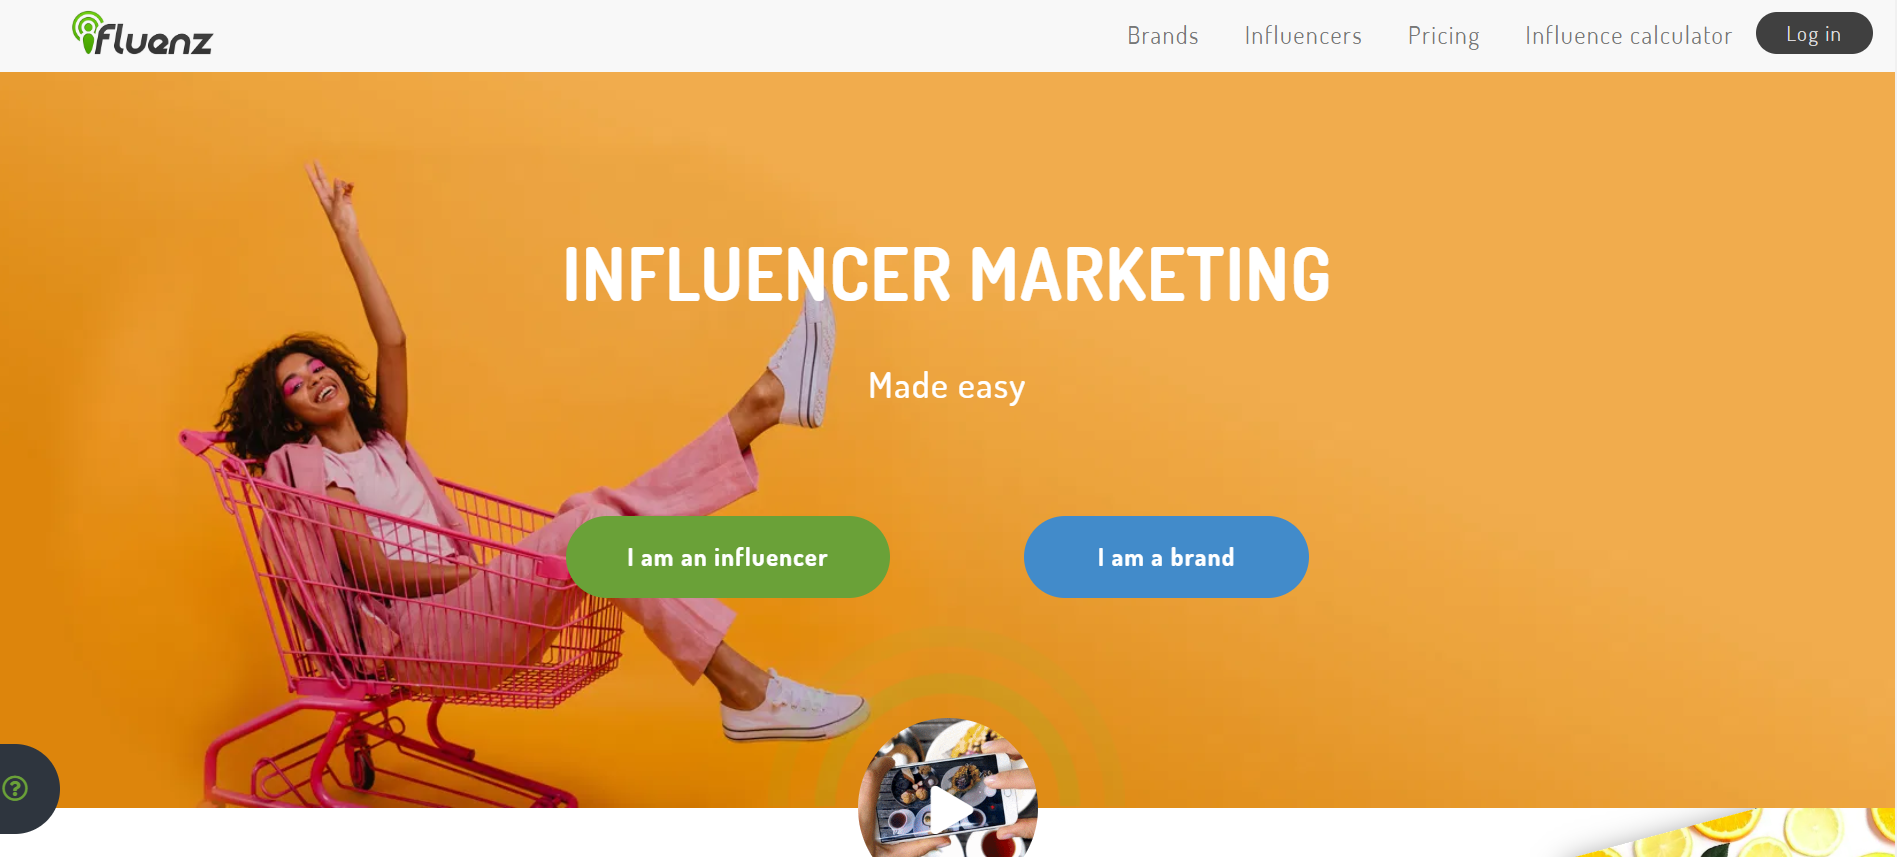 Why is Influencer Marketing the Next Big Thing in B2B?